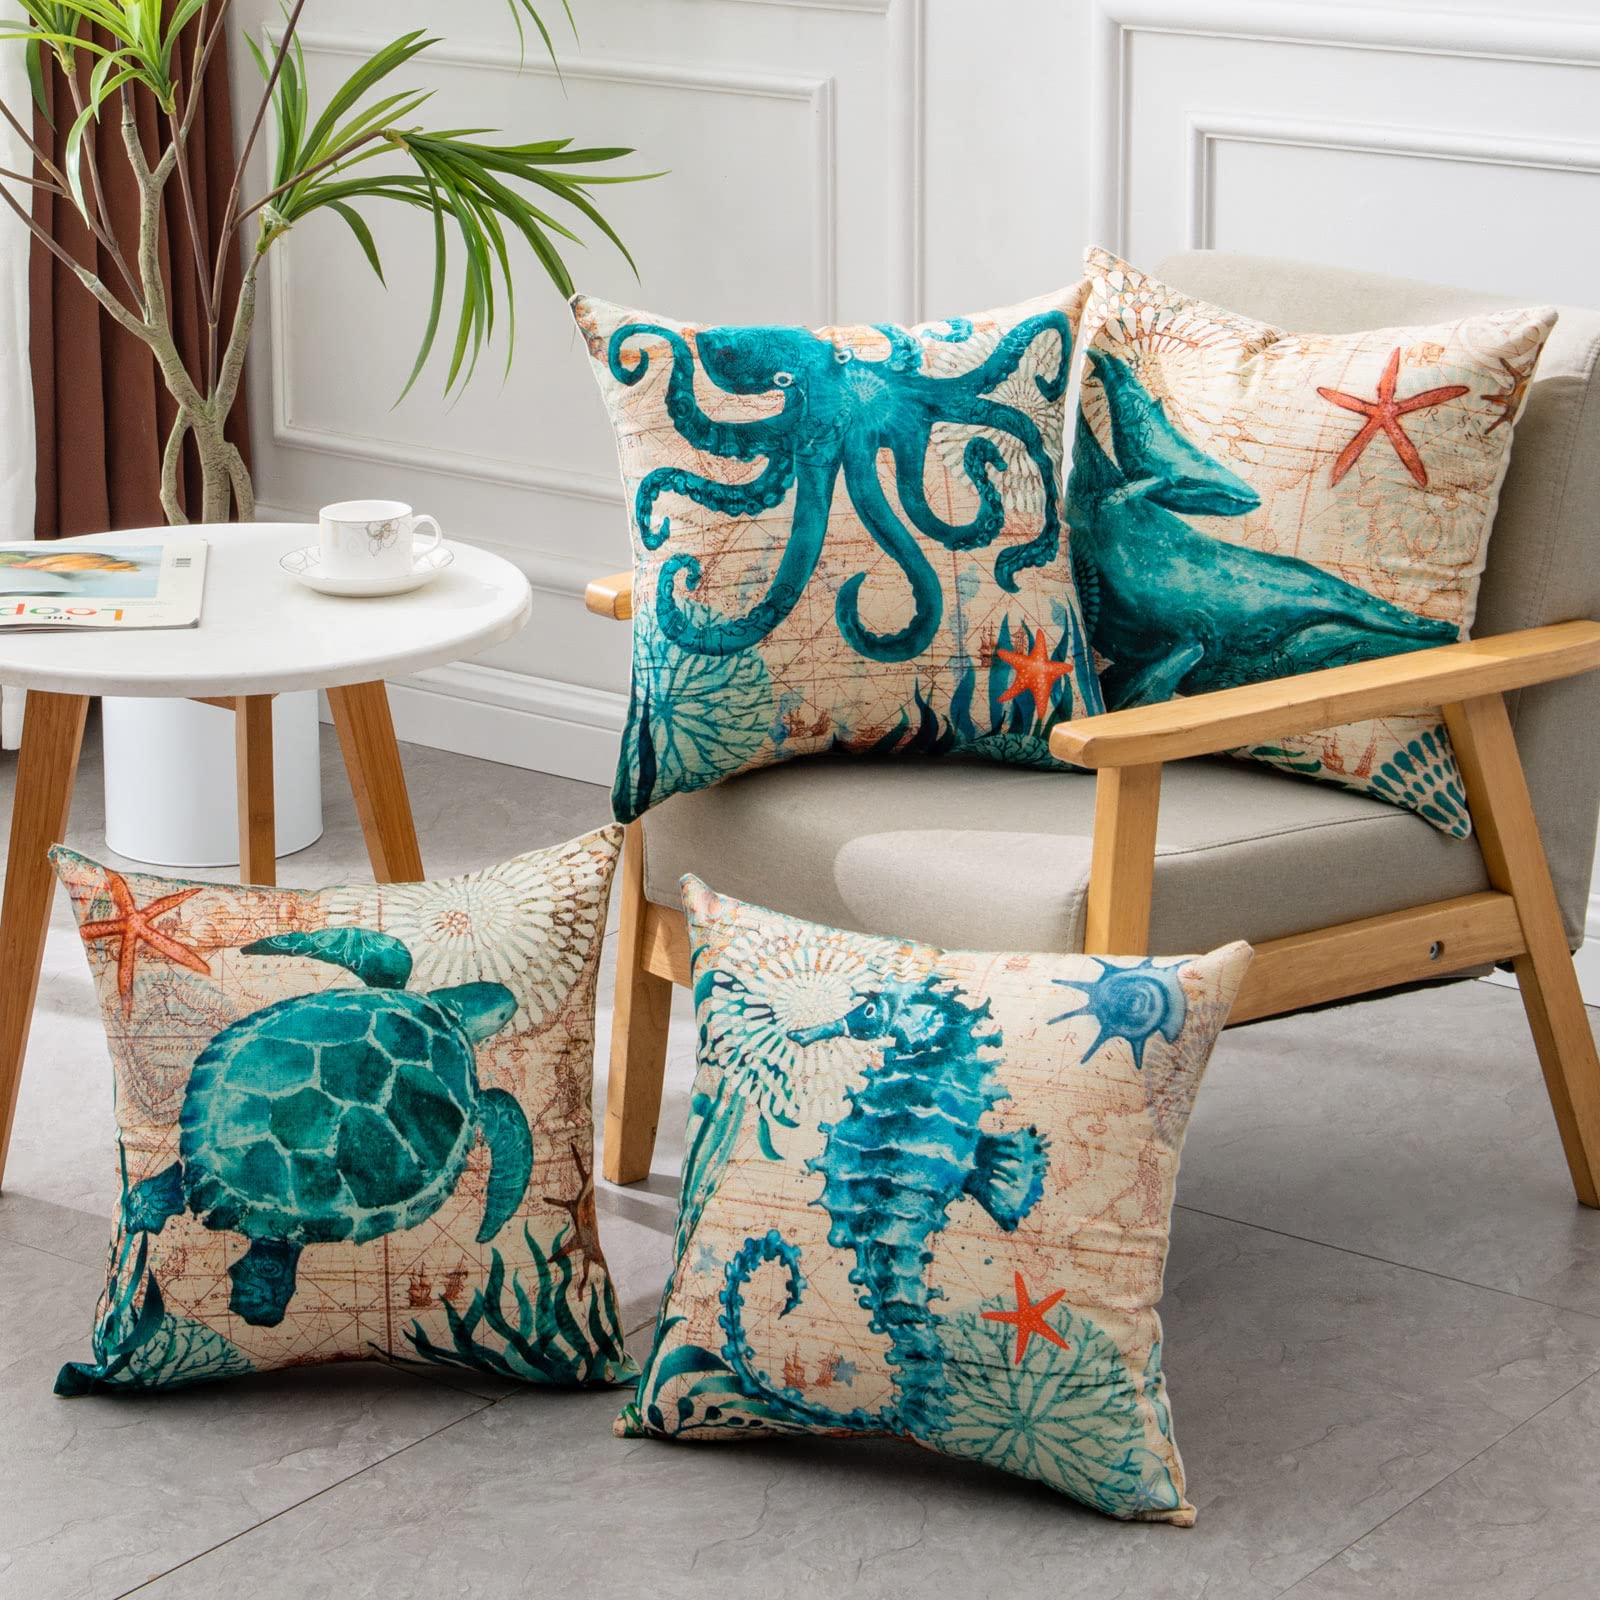 Sea Turtle Printed Cushion Covers for Home Decor on Sofa, Chair, and Seat - Throw Pillow Cases